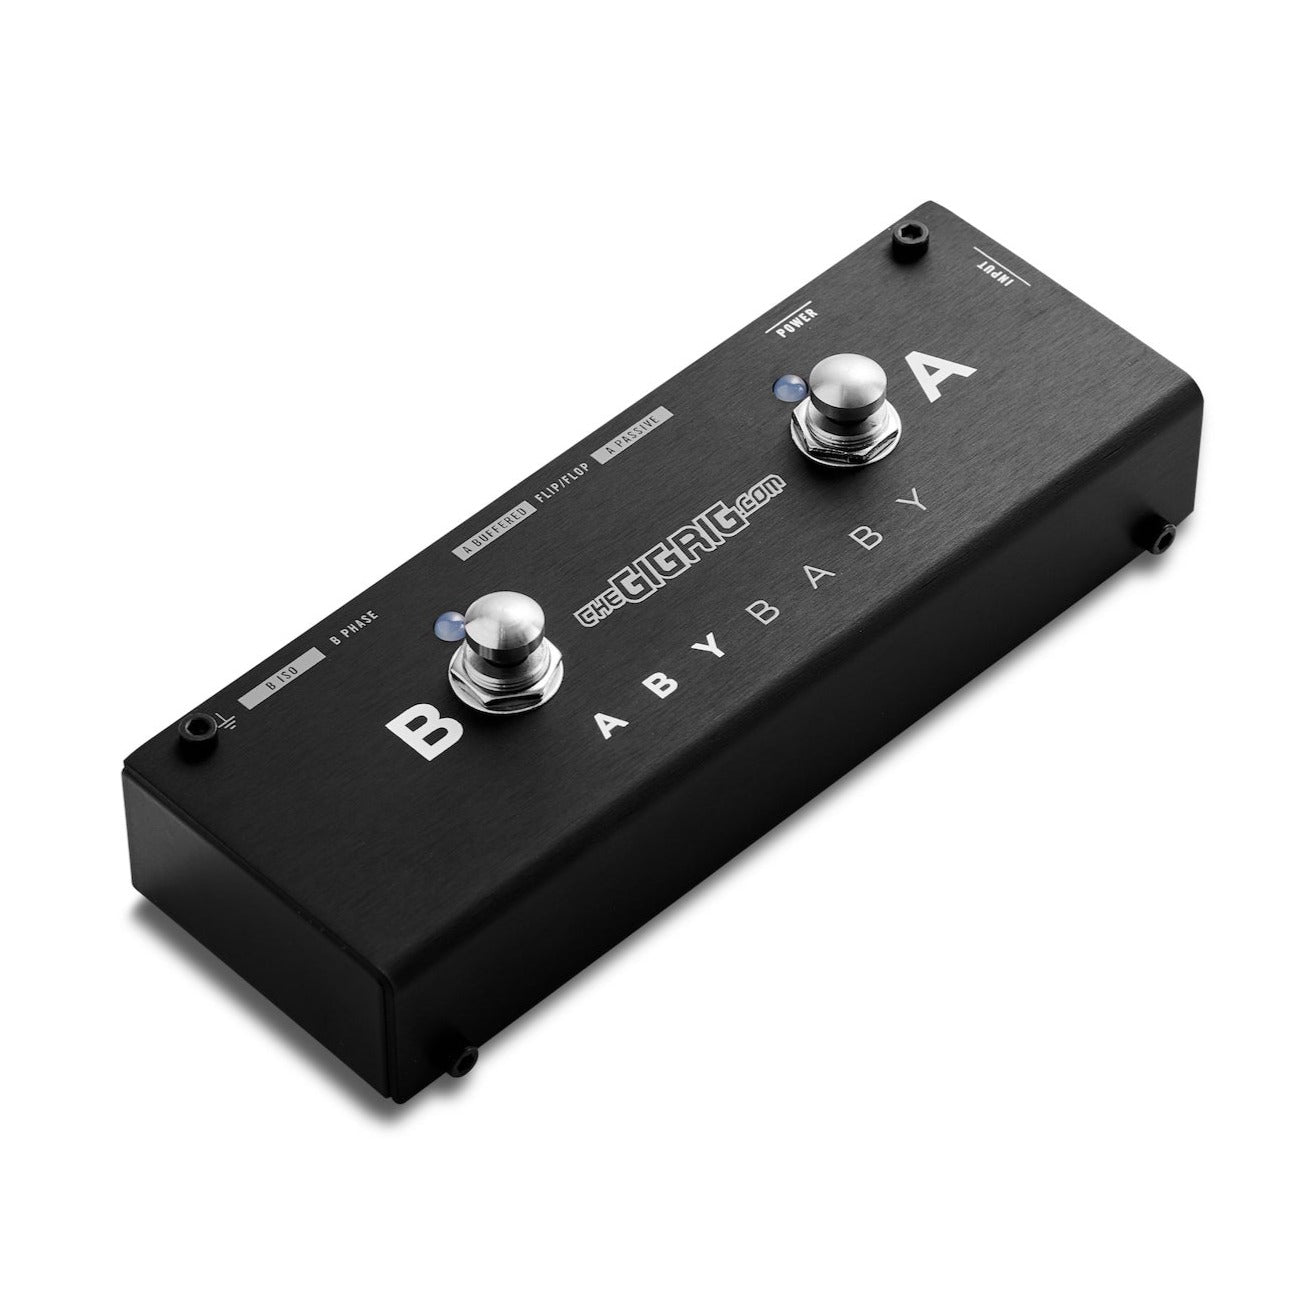 ABY-BABY guitar amp signal switcher from The GigRig